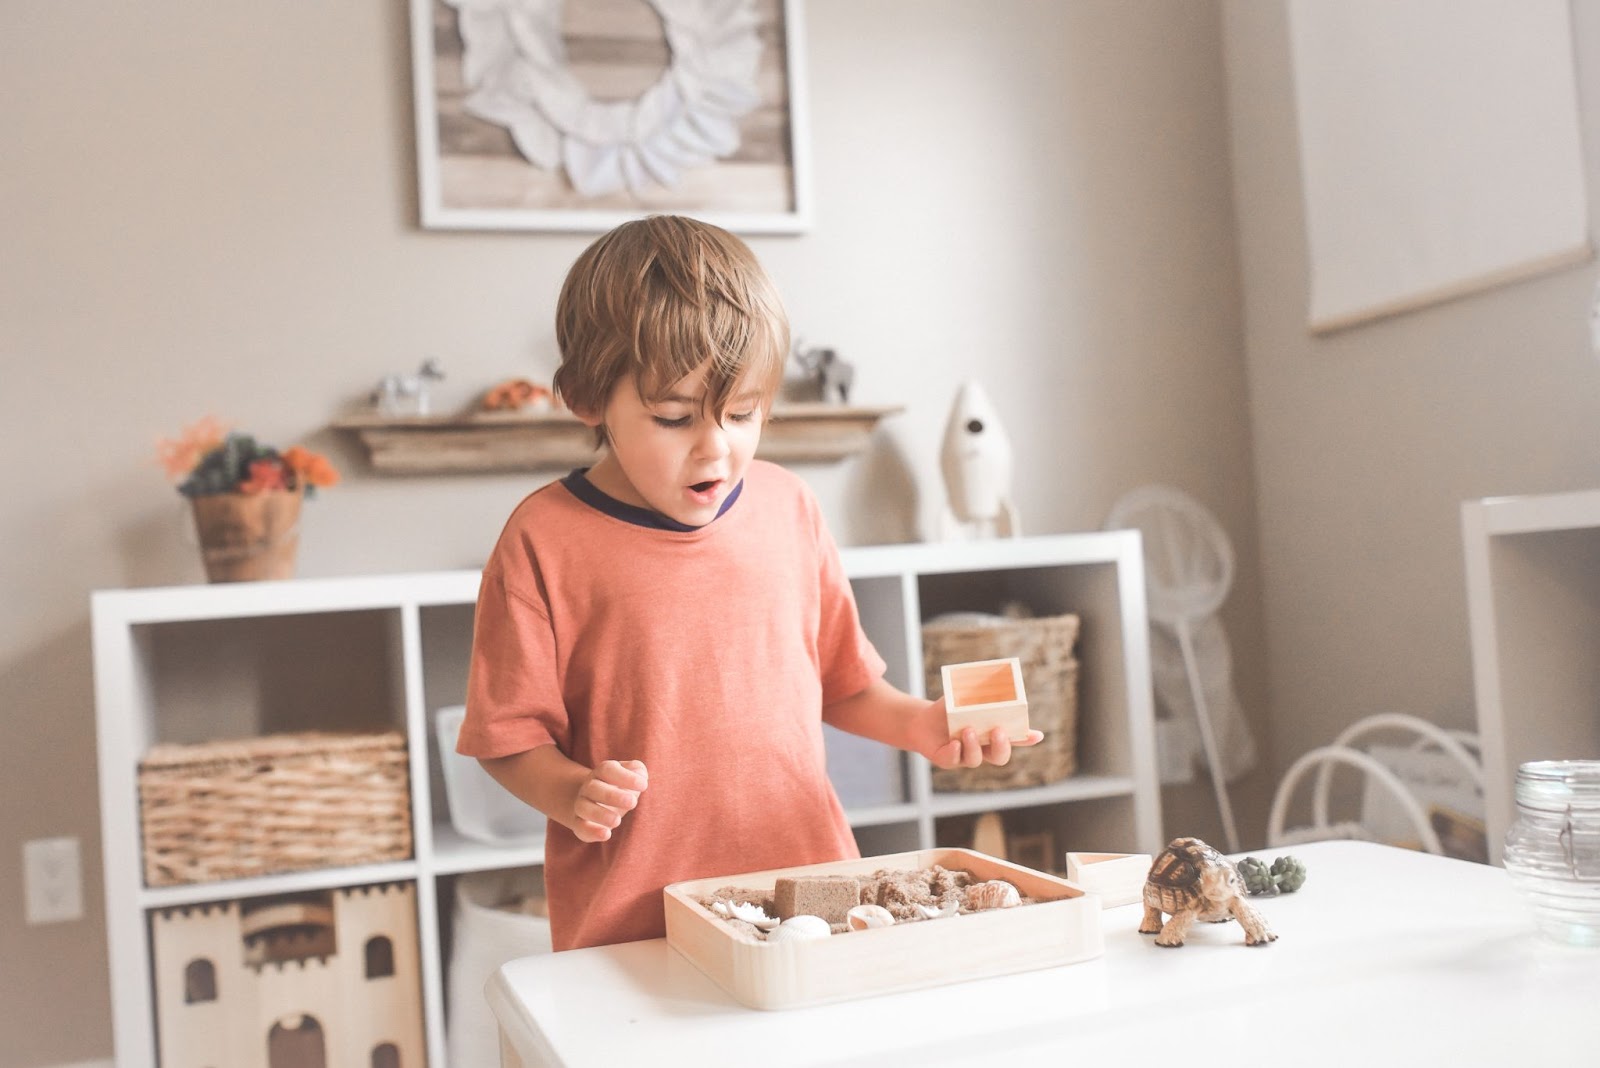 5 Tips for Making Your Home Child-Friendly